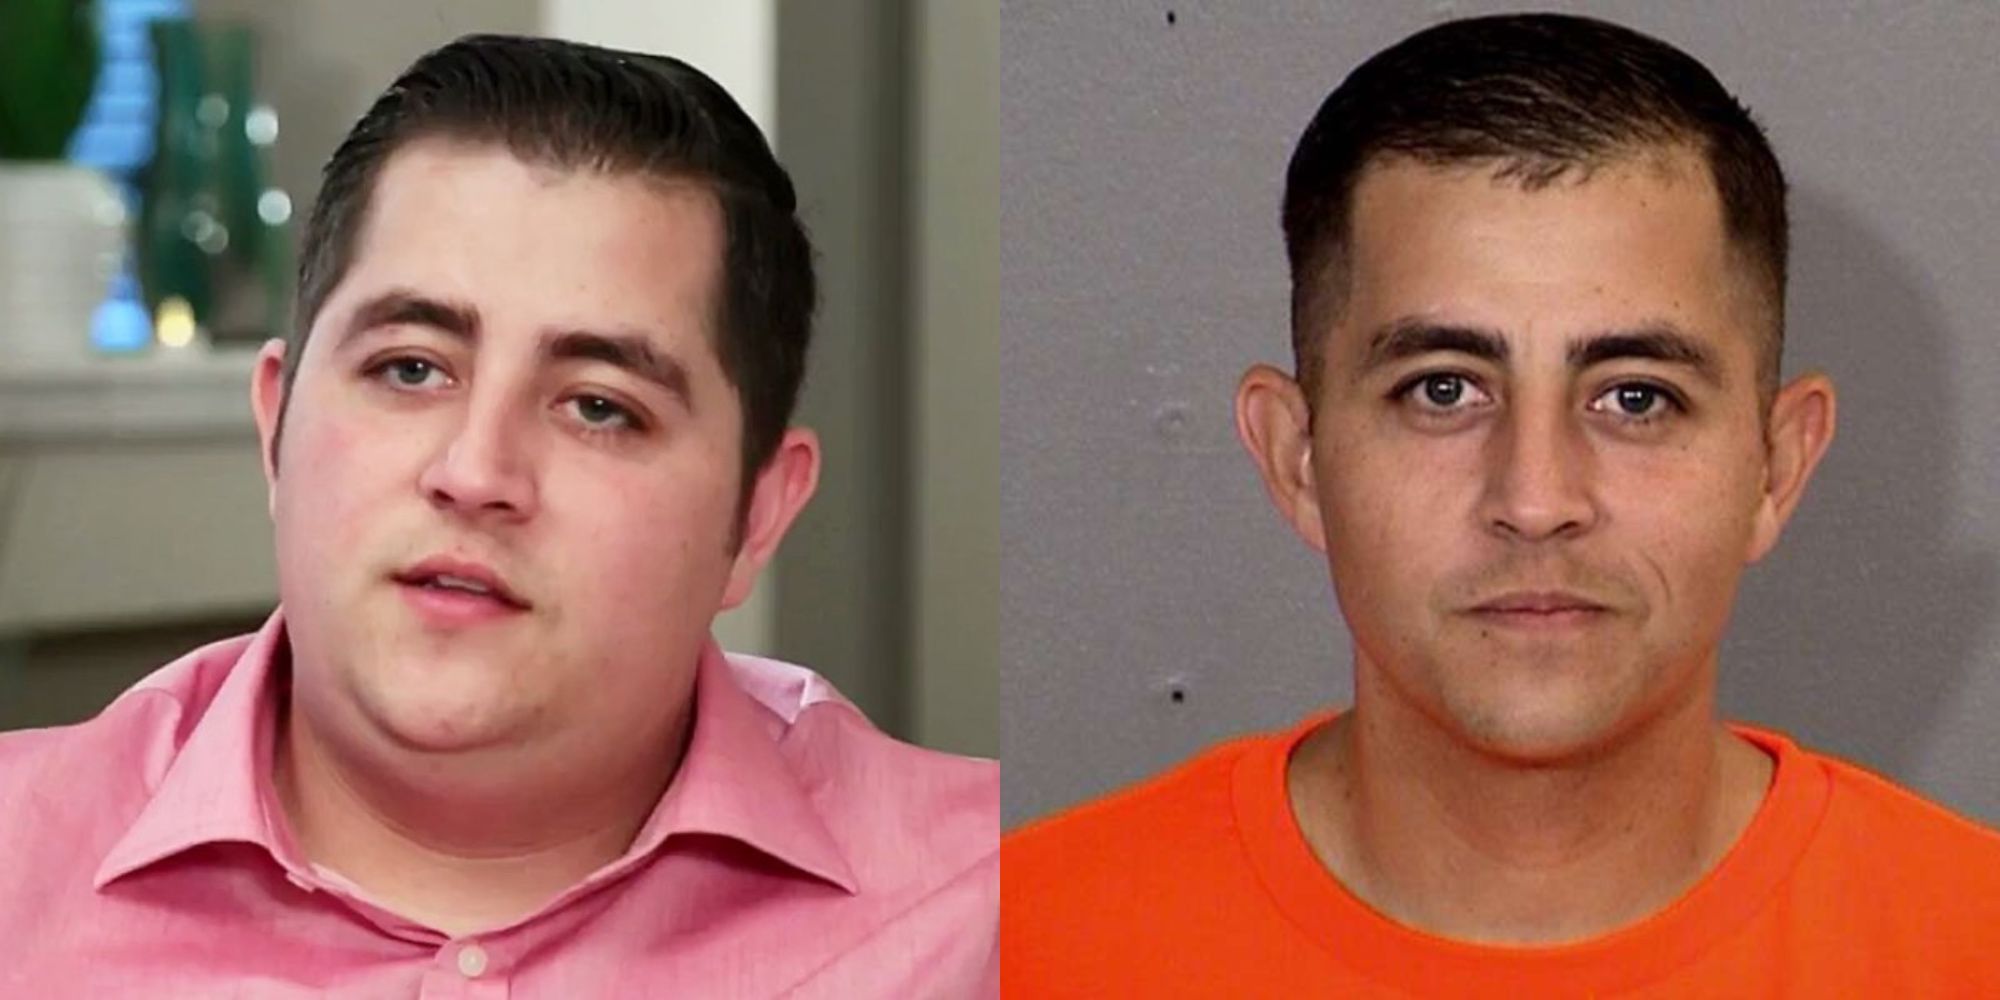 Split image of Jorge from 90 Day Fiancé and his latest transformation photo from prison